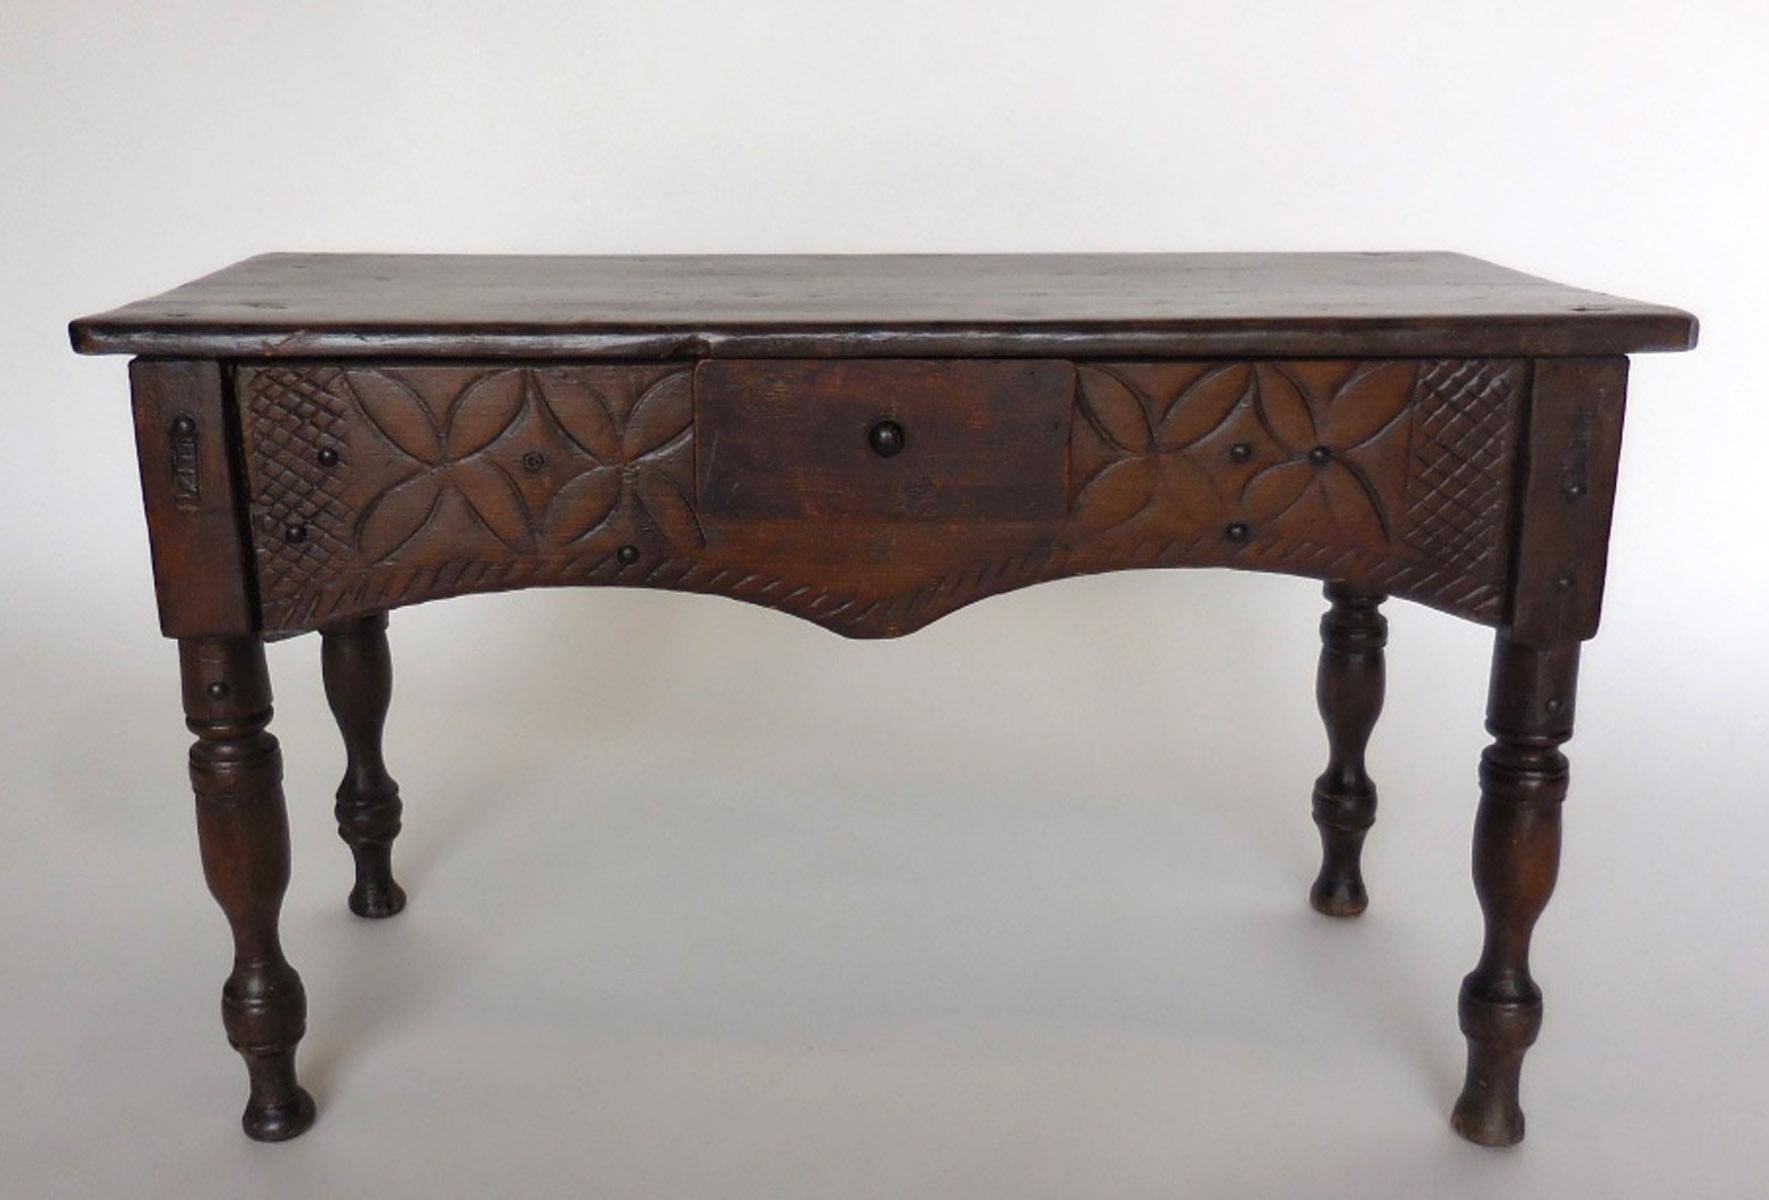 Carved tropical wood child's table with carvings and small drawer. Original nails, turned legs and a beautiful naturally aged patina throughout. Carvings have been smoothed down through years of wear. Legs are dainty and elegant as is the apron.